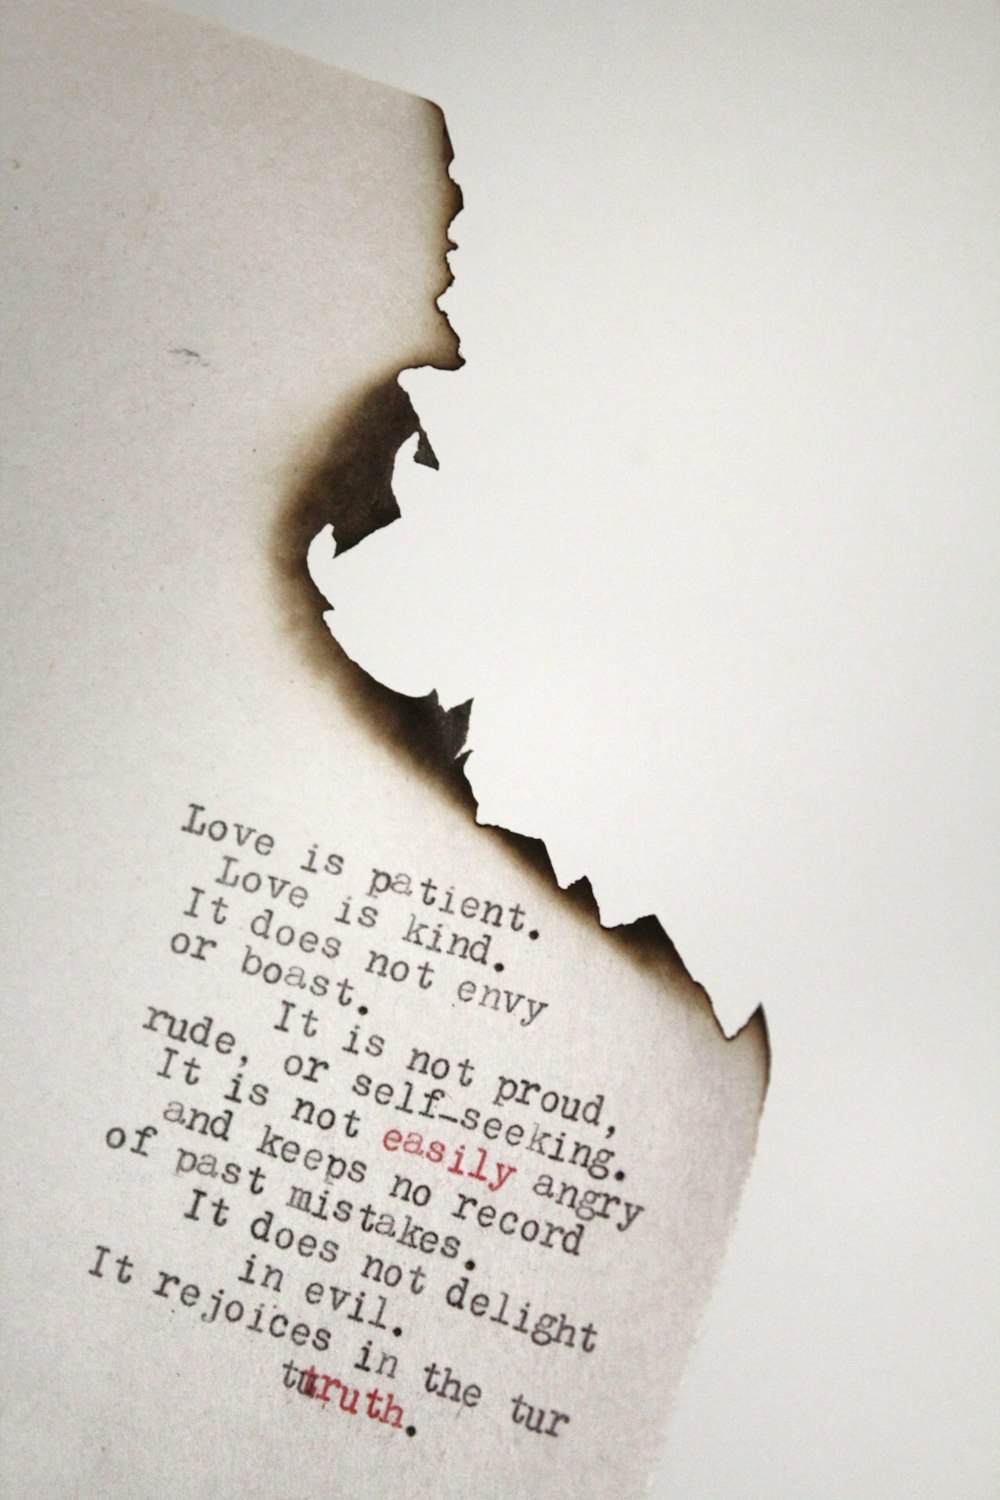 Love is patient Love is kind printed on burned paper